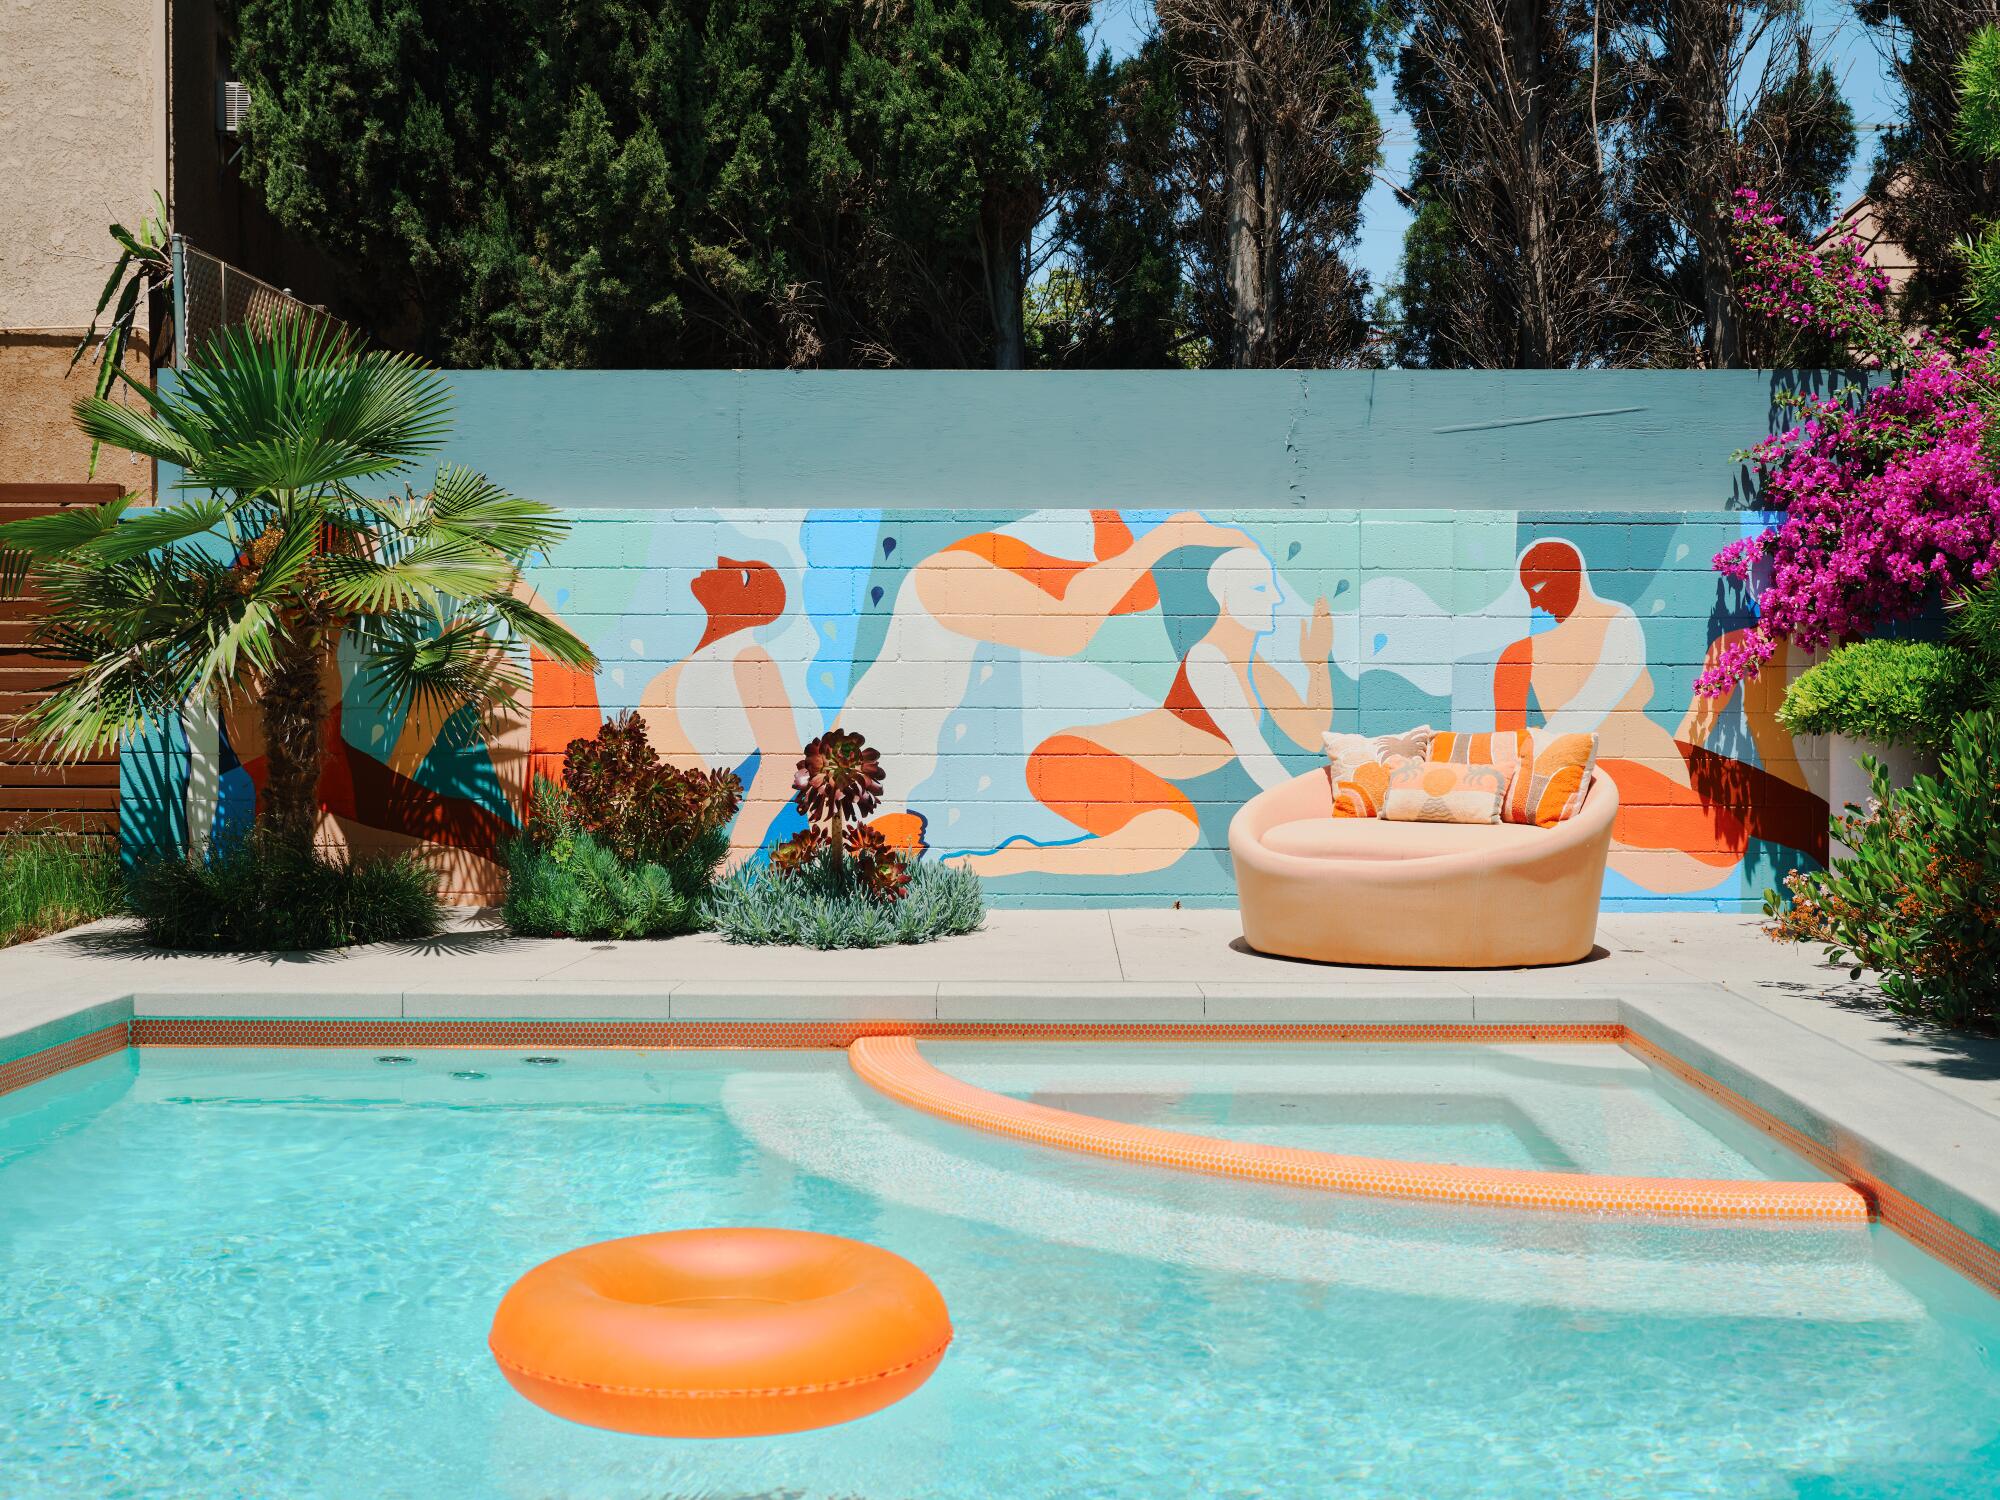 An orange inflatable ring floats in the pool in front of a mural showing bathers in orange.